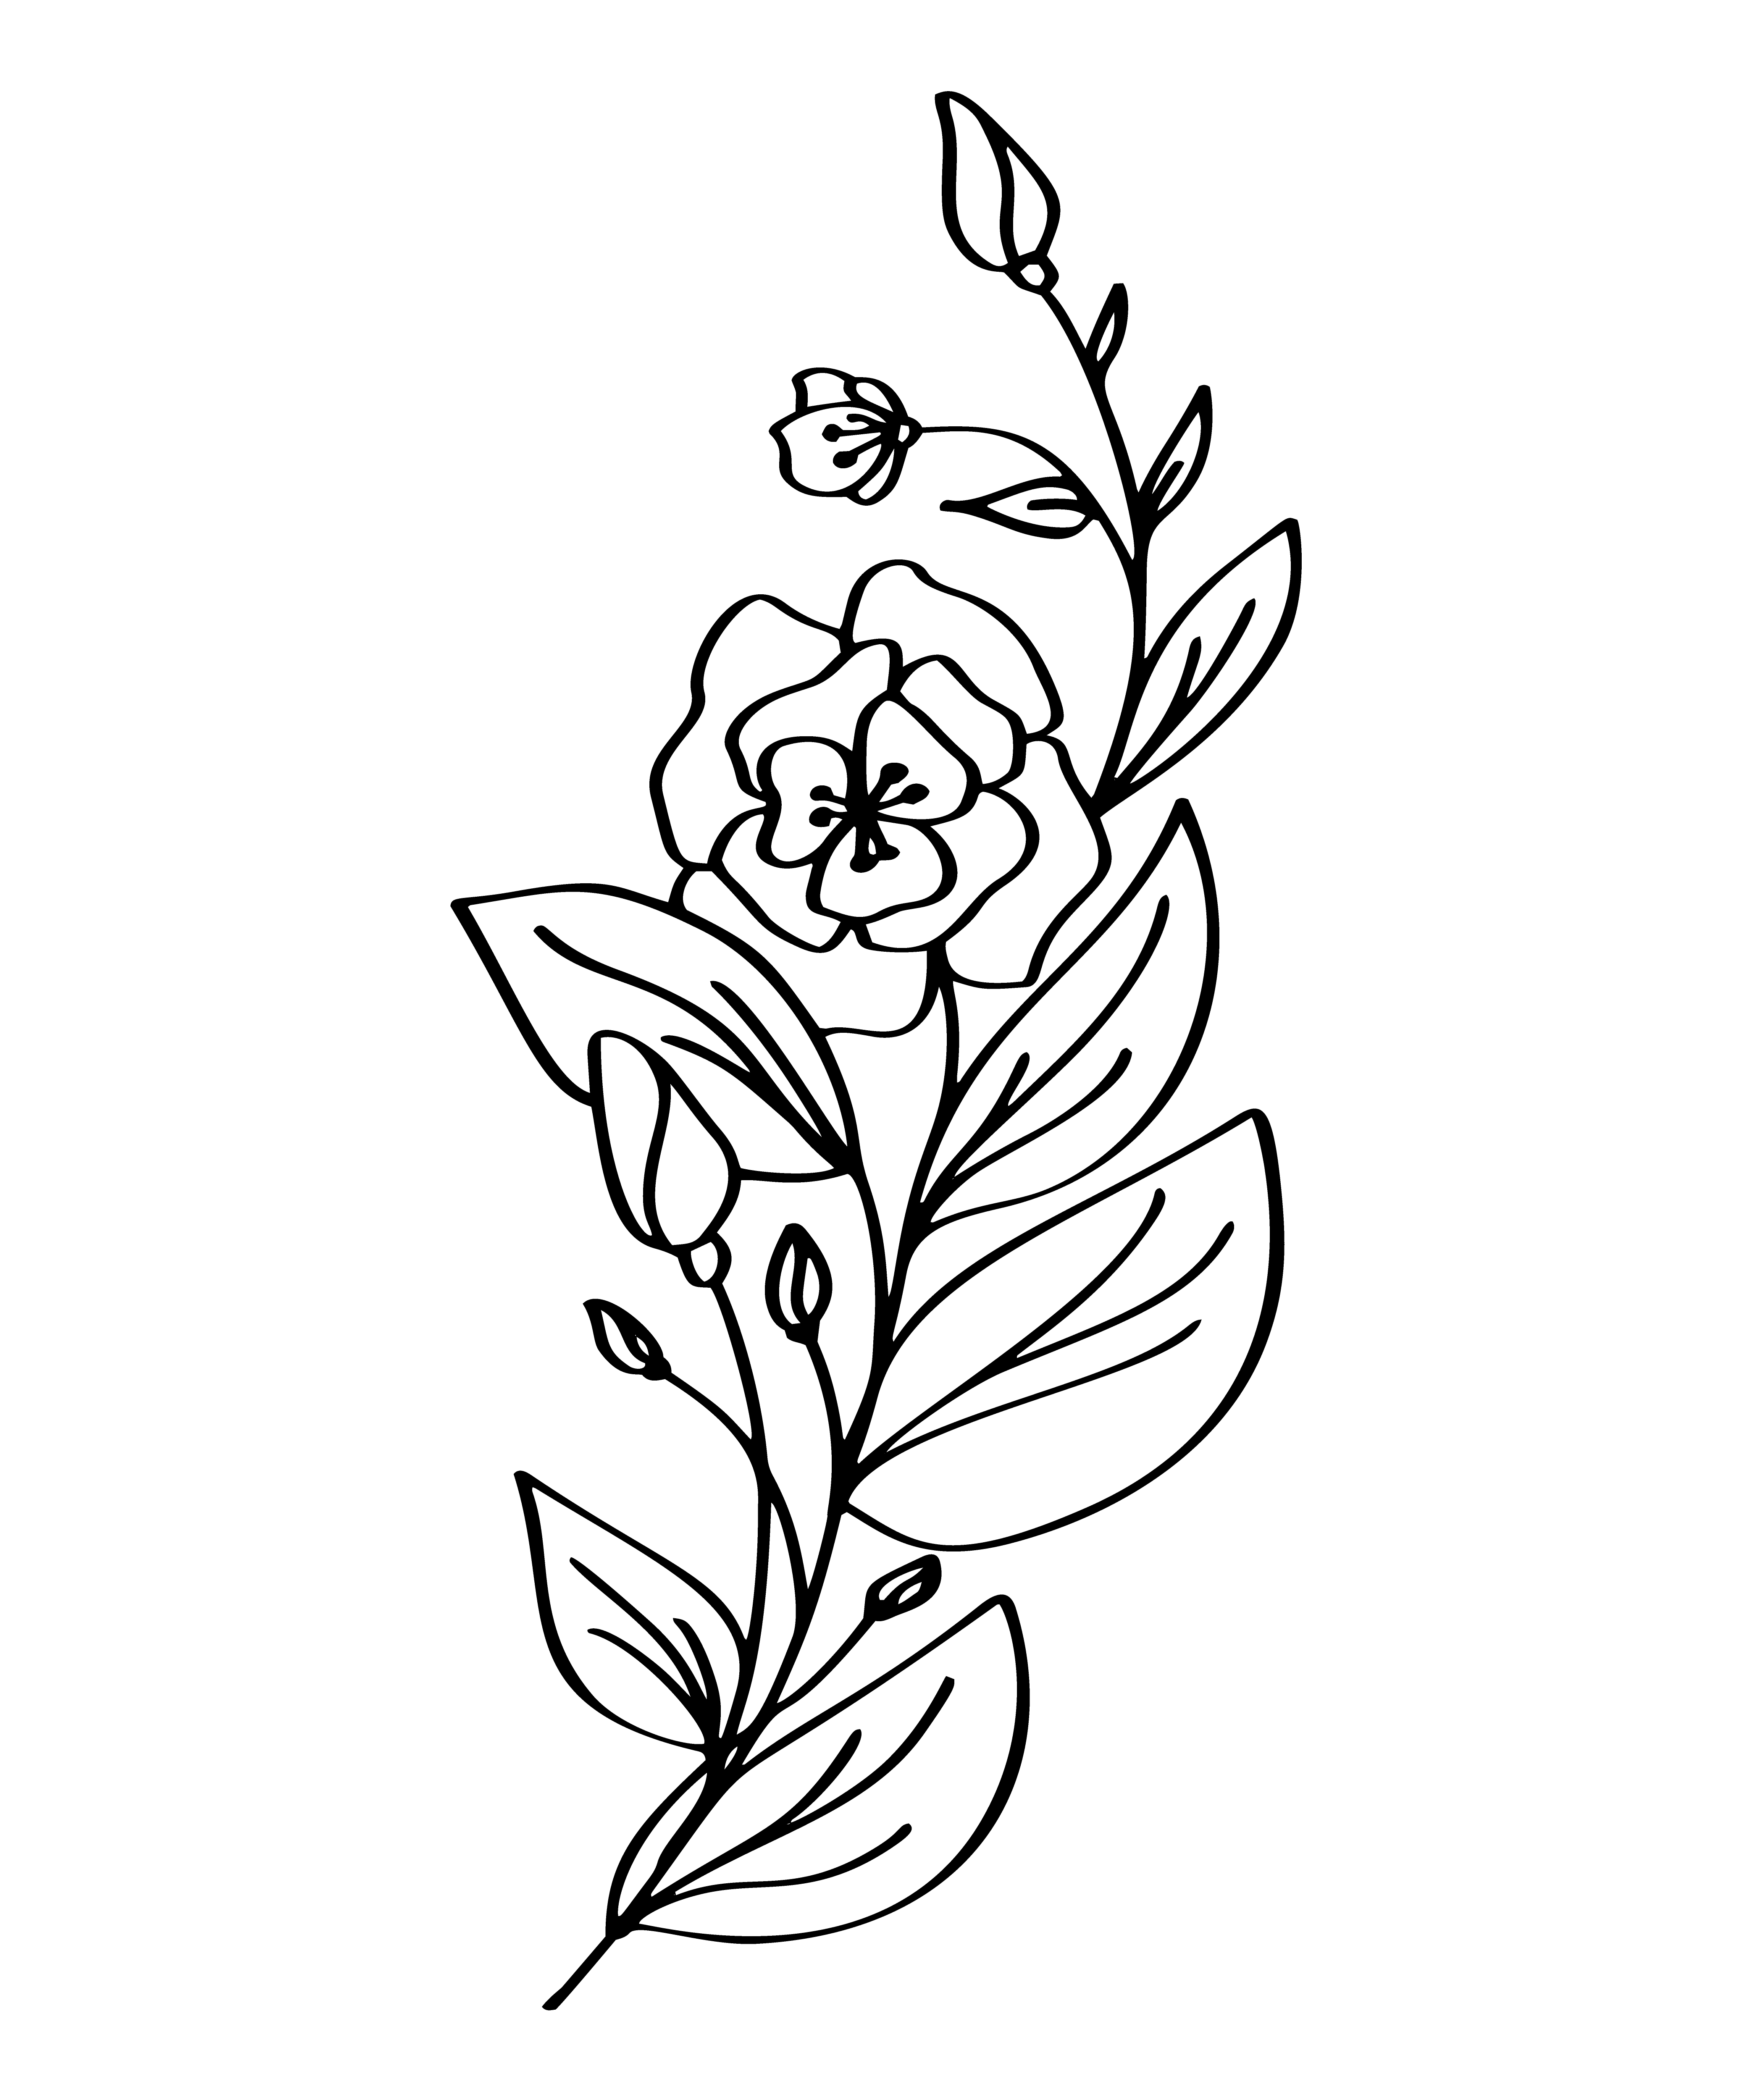 Hand drawn modern flowers drawing and sketch floral with line-art